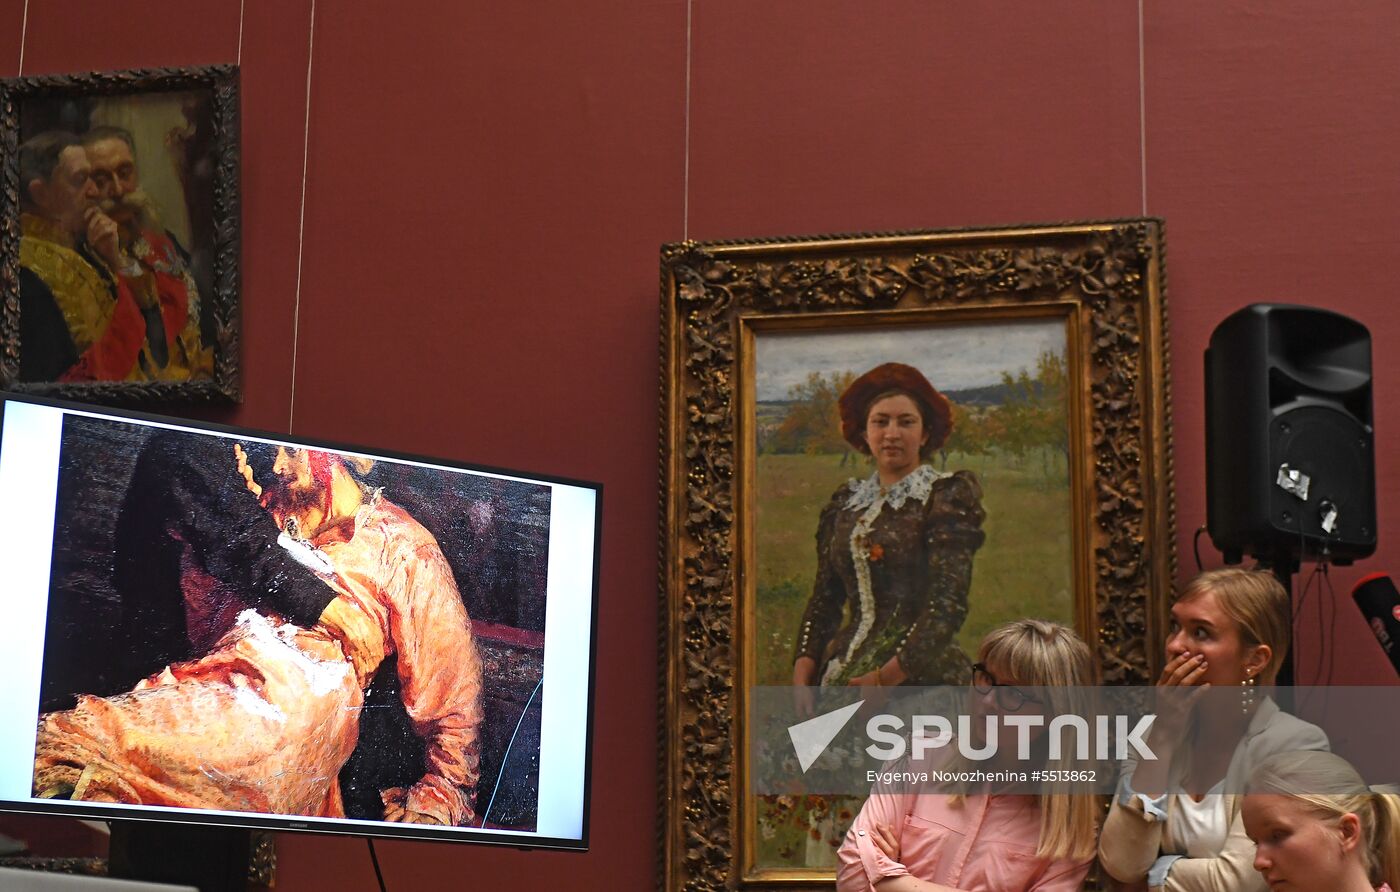 Briefing on damage to Ilya Repin's  painting in Tretyakov Gallery in Moscow.